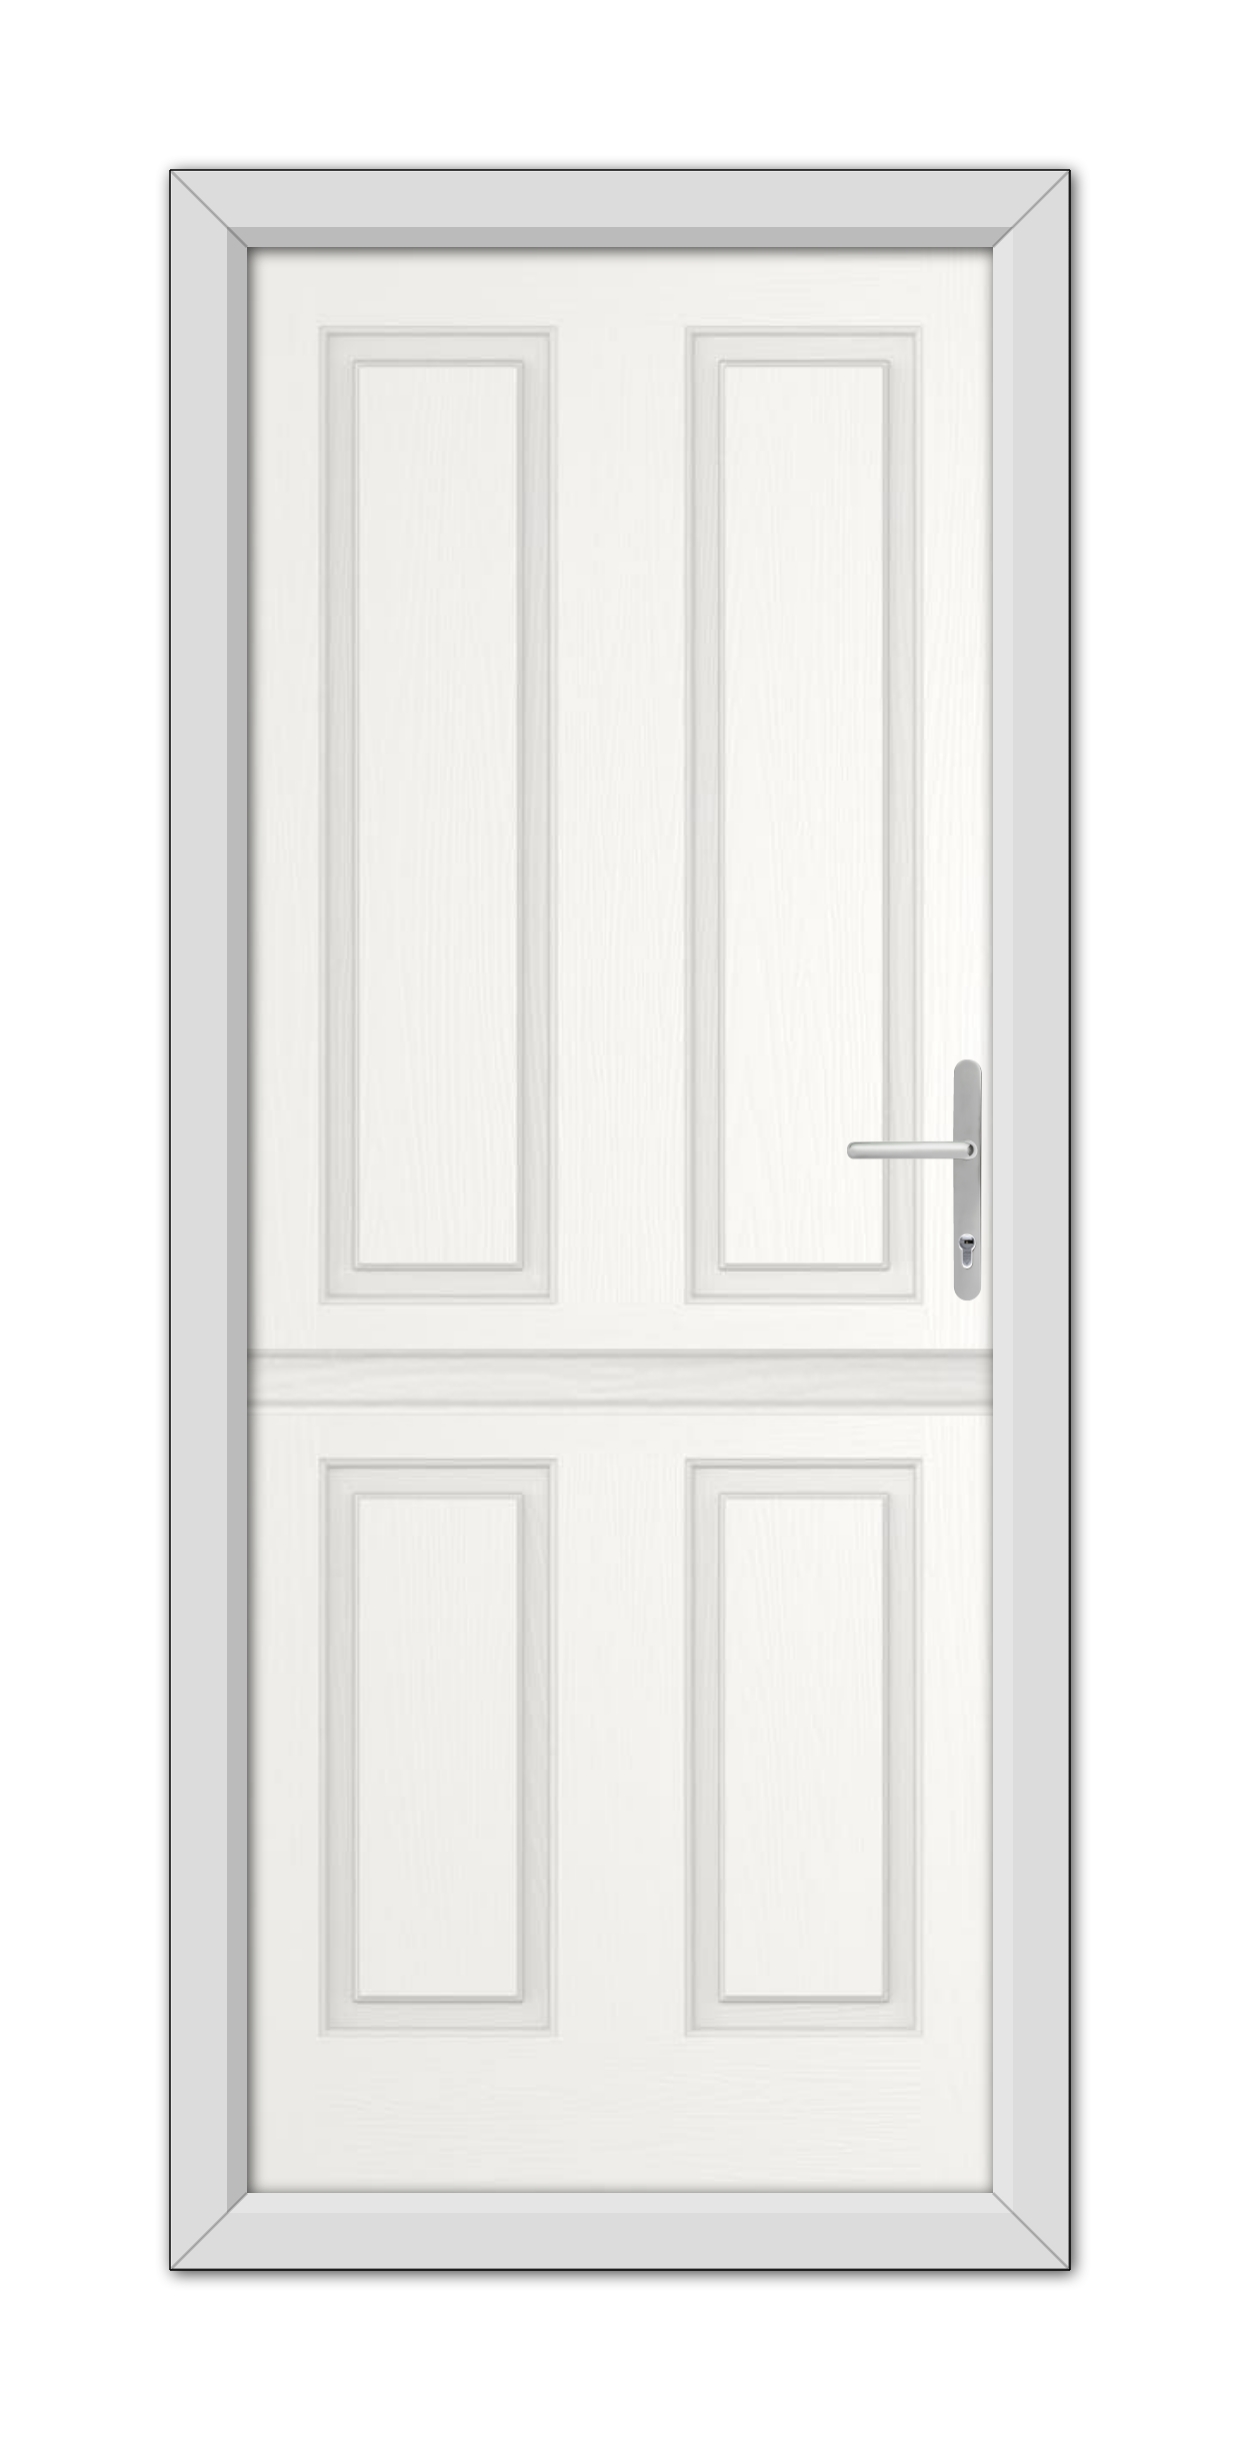 A closed White Whitmore Solid Stable Composite Door 48mm Timber Core with a metal handle, set within a simple frame, viewed head-on against a white background.